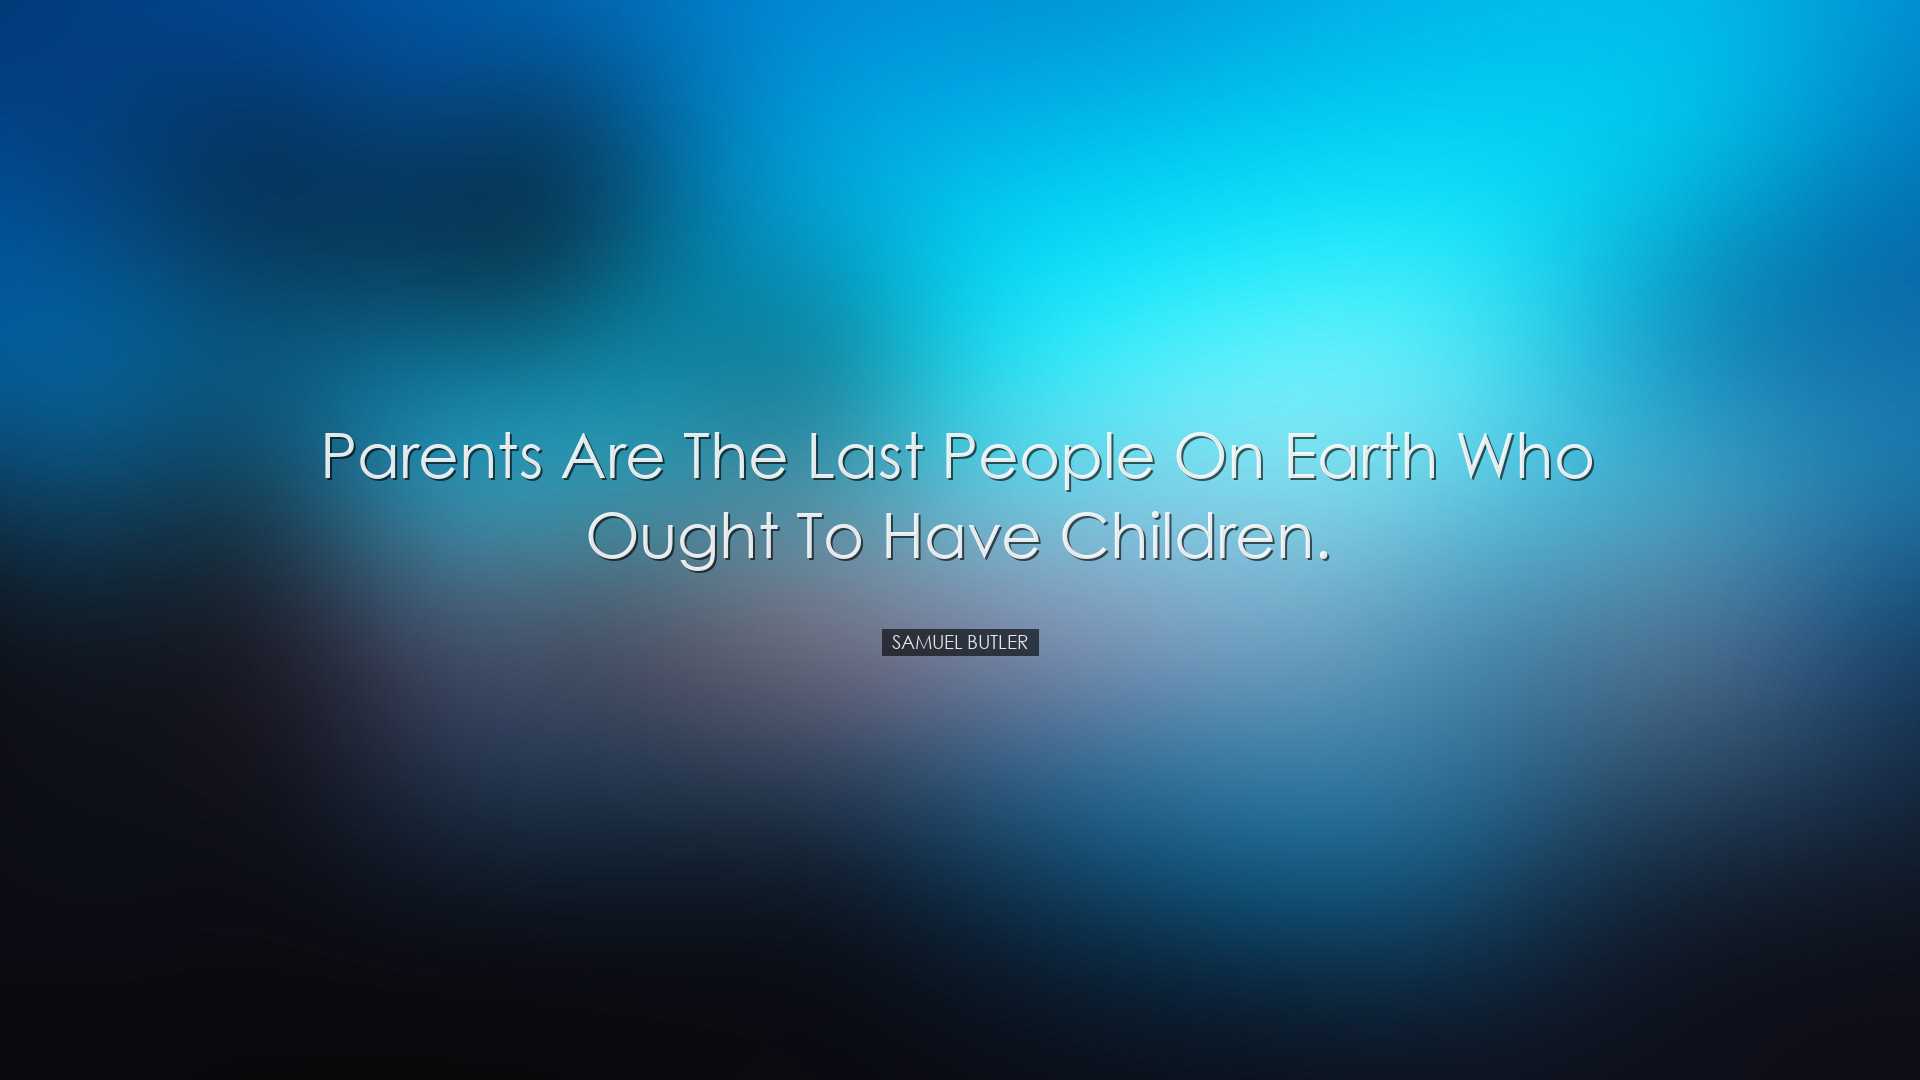 Parents are the last people on earth who ought to have children. -